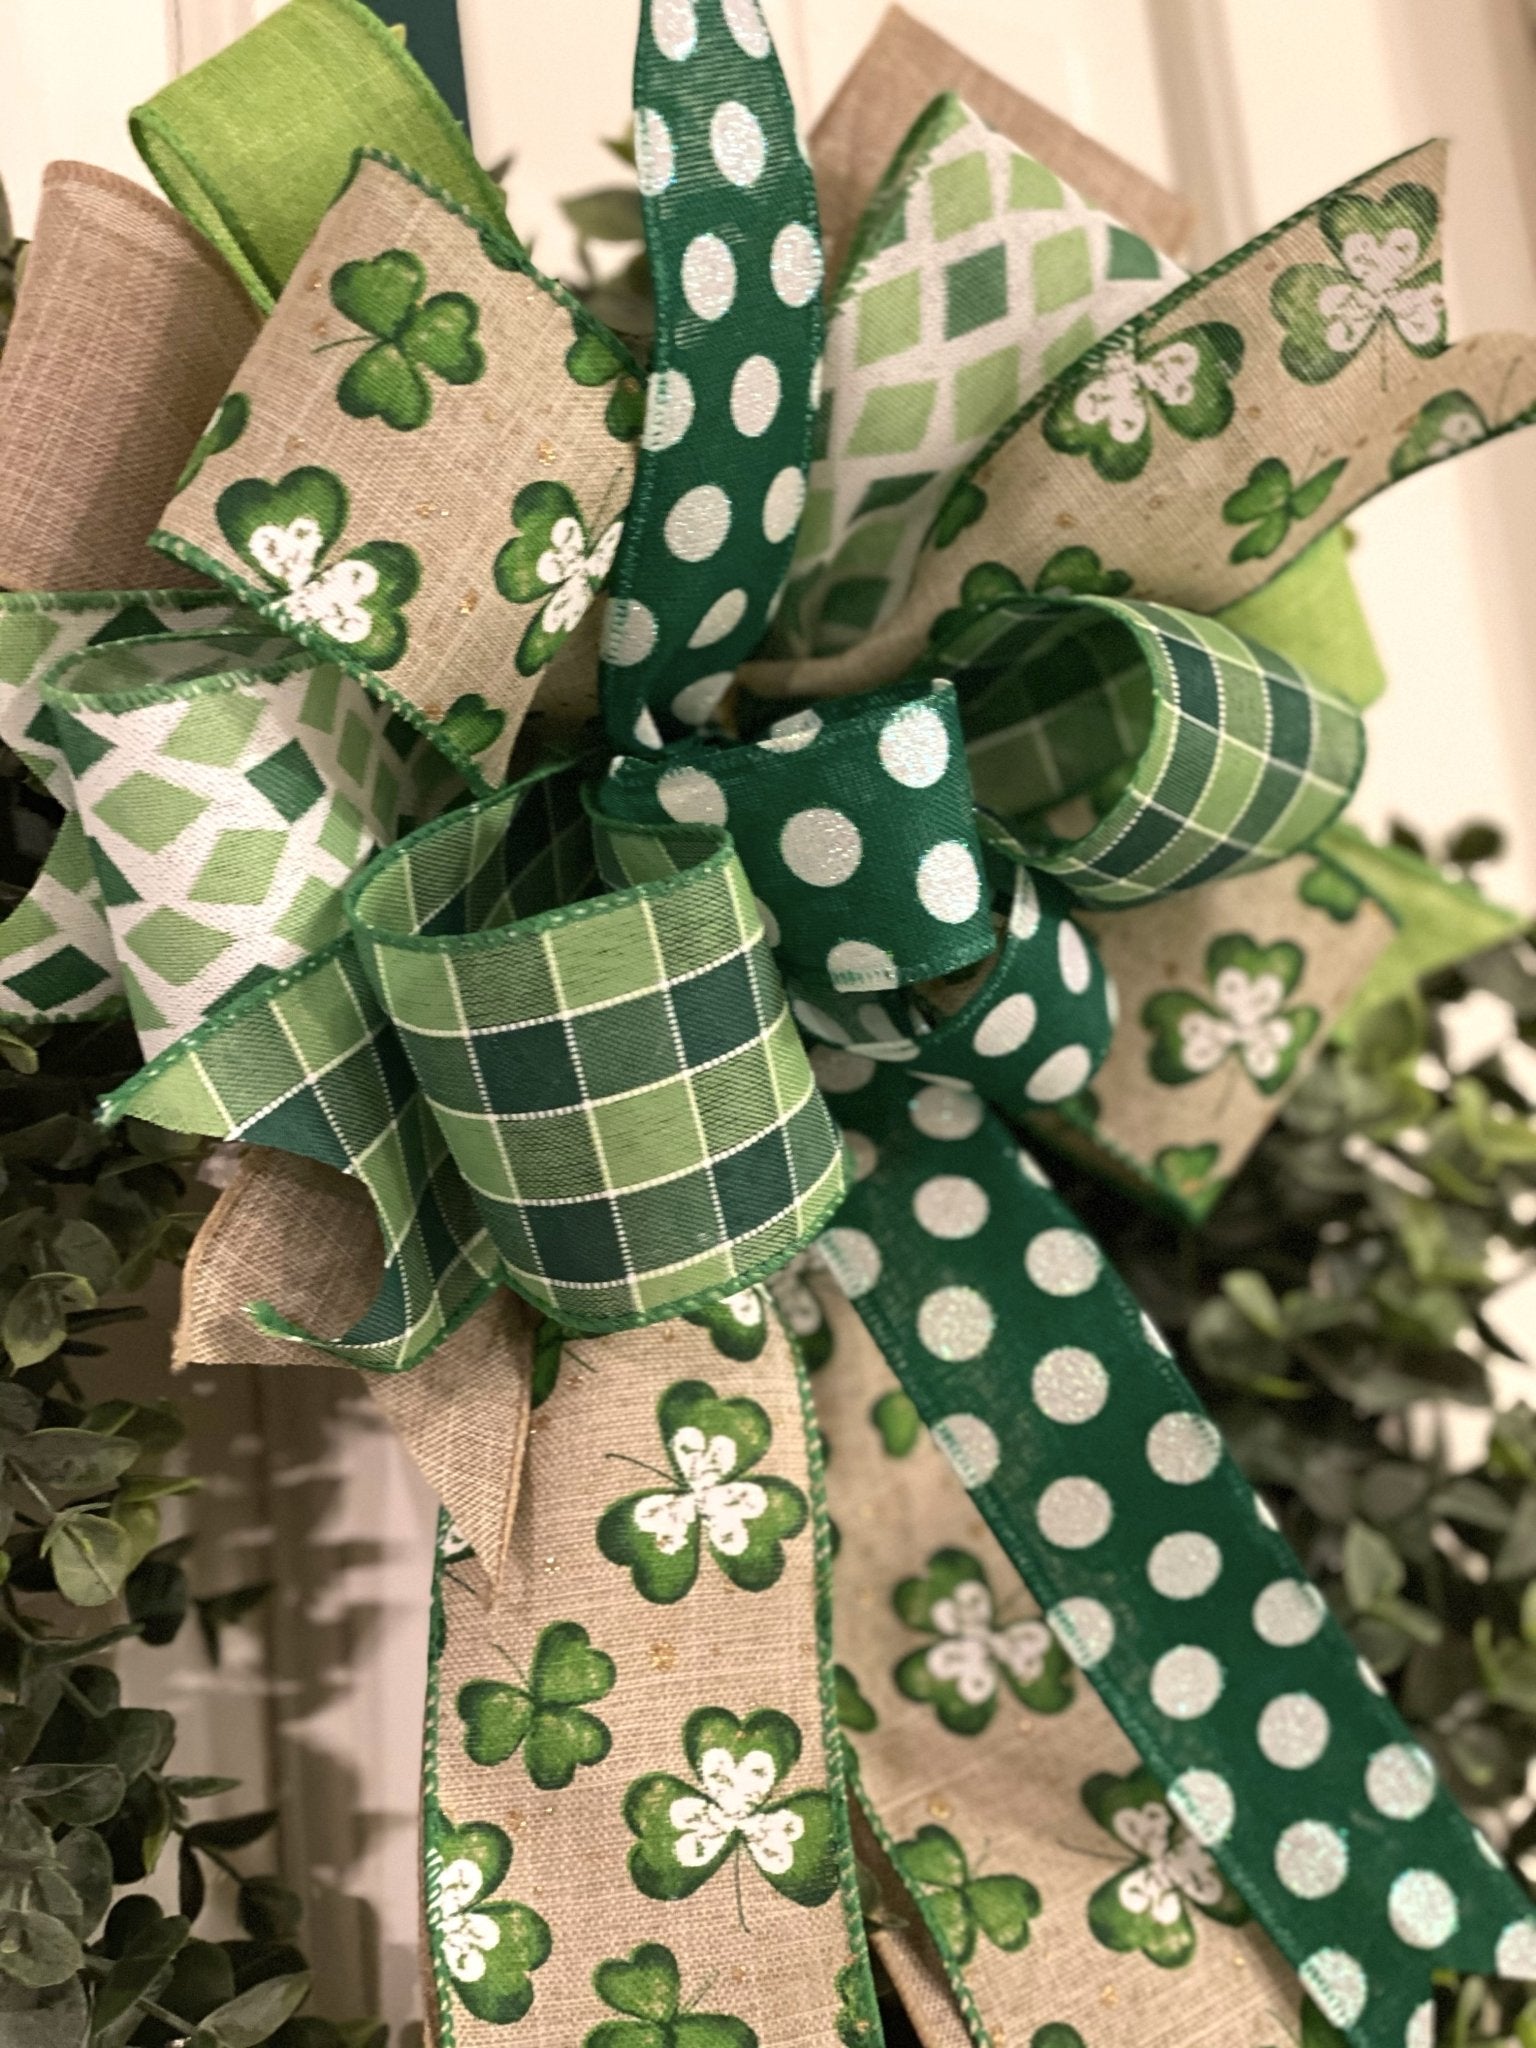 St Patricks Day Bows - Linen Bows - Wired Emerald Green Linen Bow 6 Inch